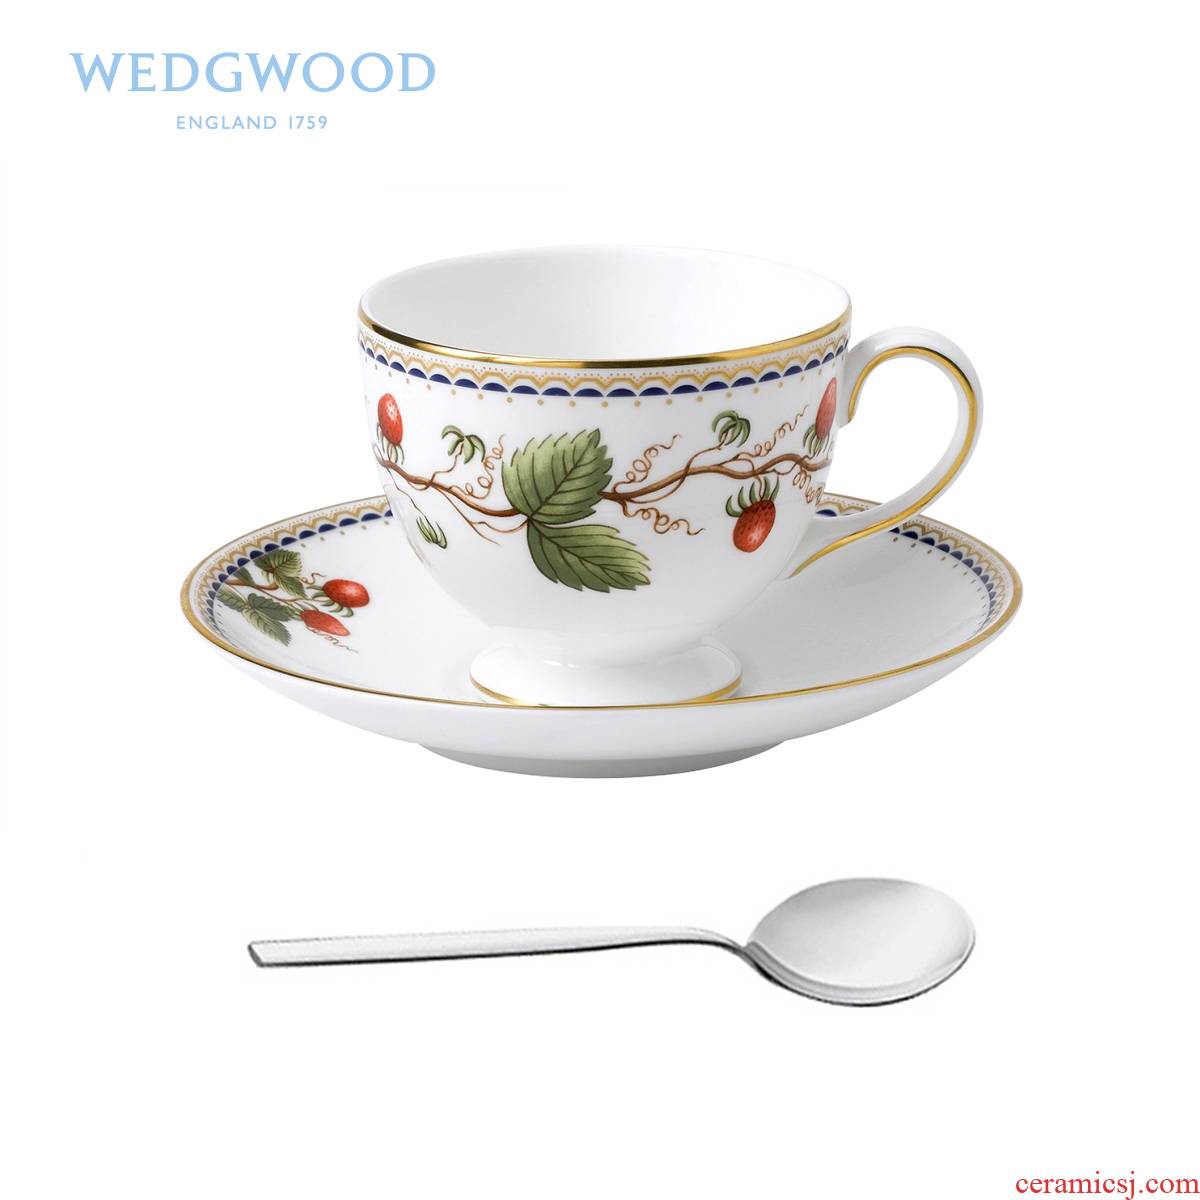 Wedgwood Wild Strawberry Strawberry new ipads China standard tea/coffee cup 1 dish with WMF run out